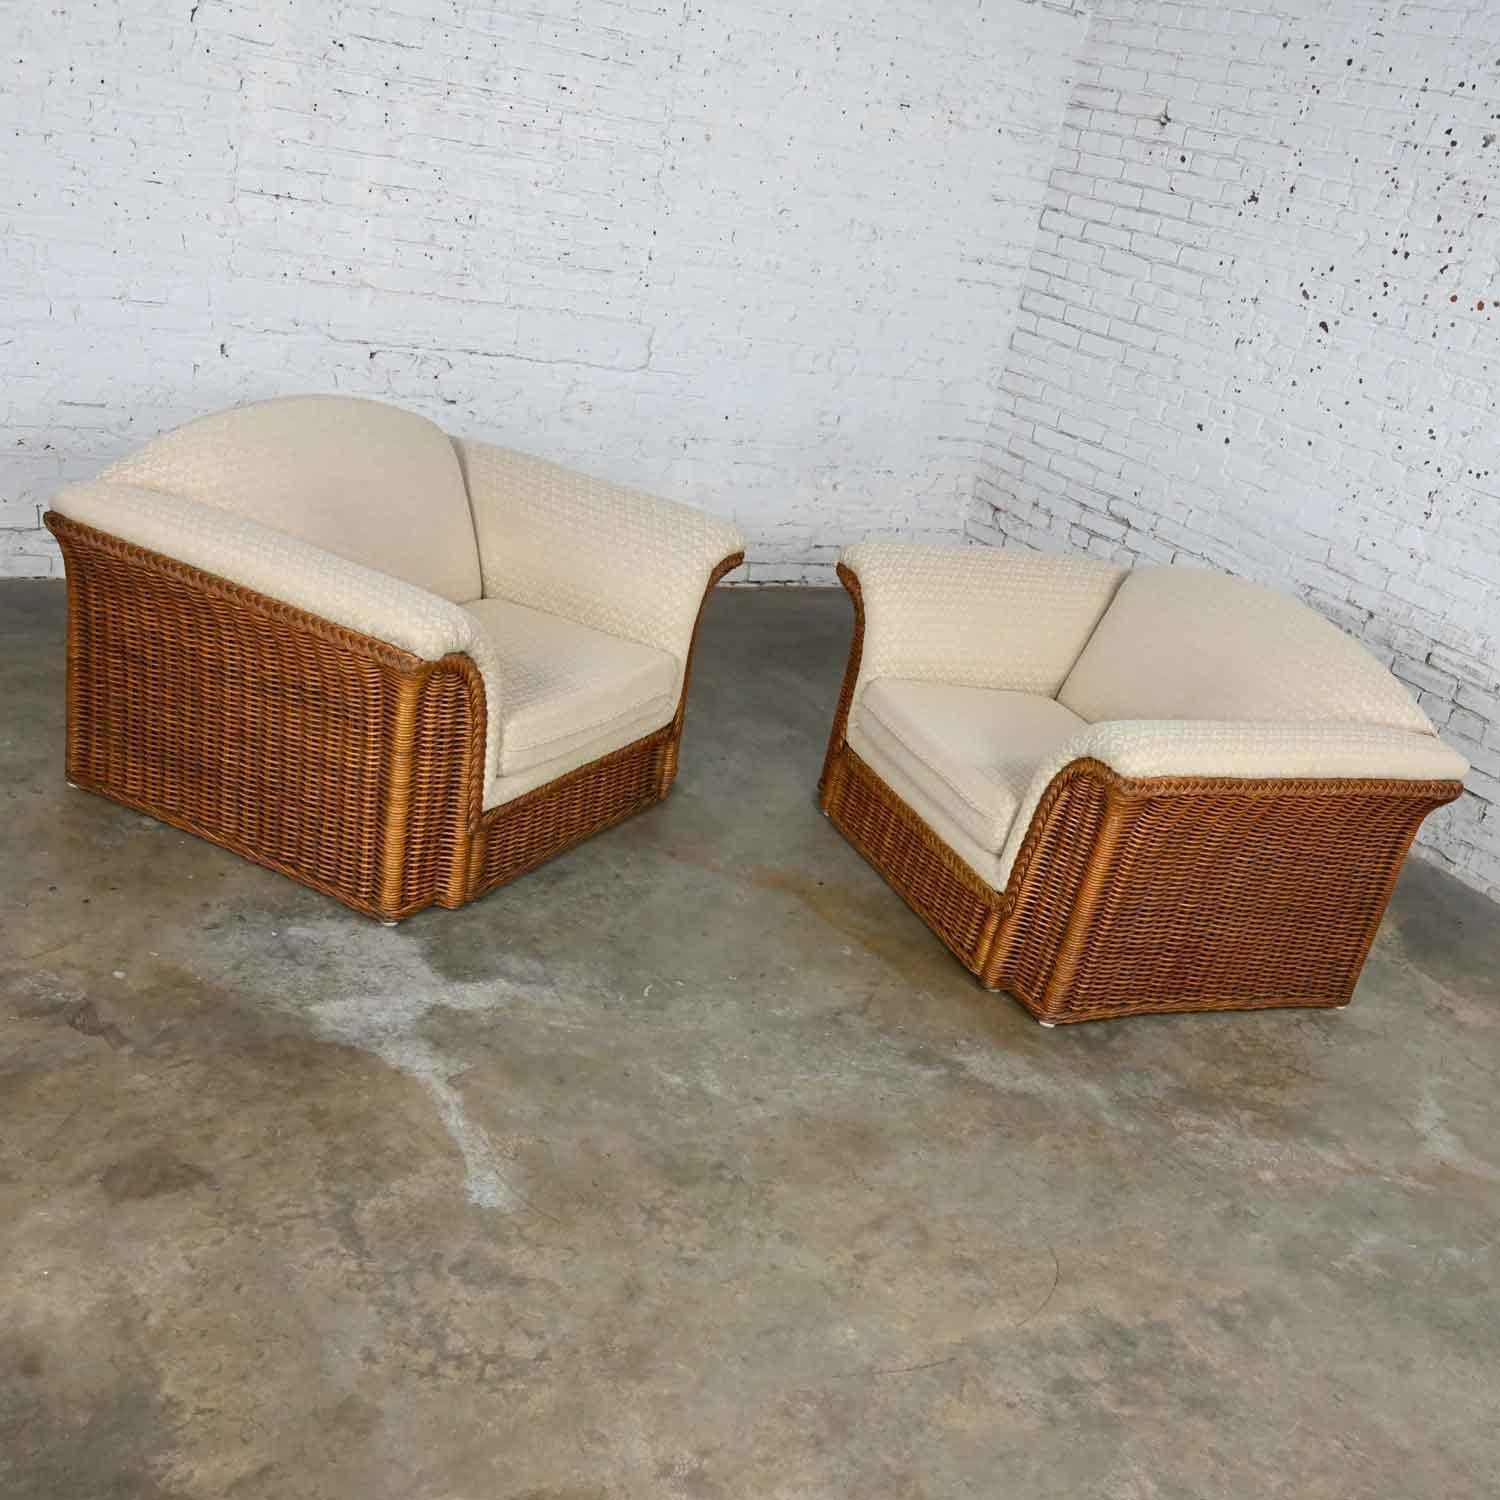 Rattan Wicker Pair of Oversized Lounge Chairs Manner of Michael Taylor For Sale 3